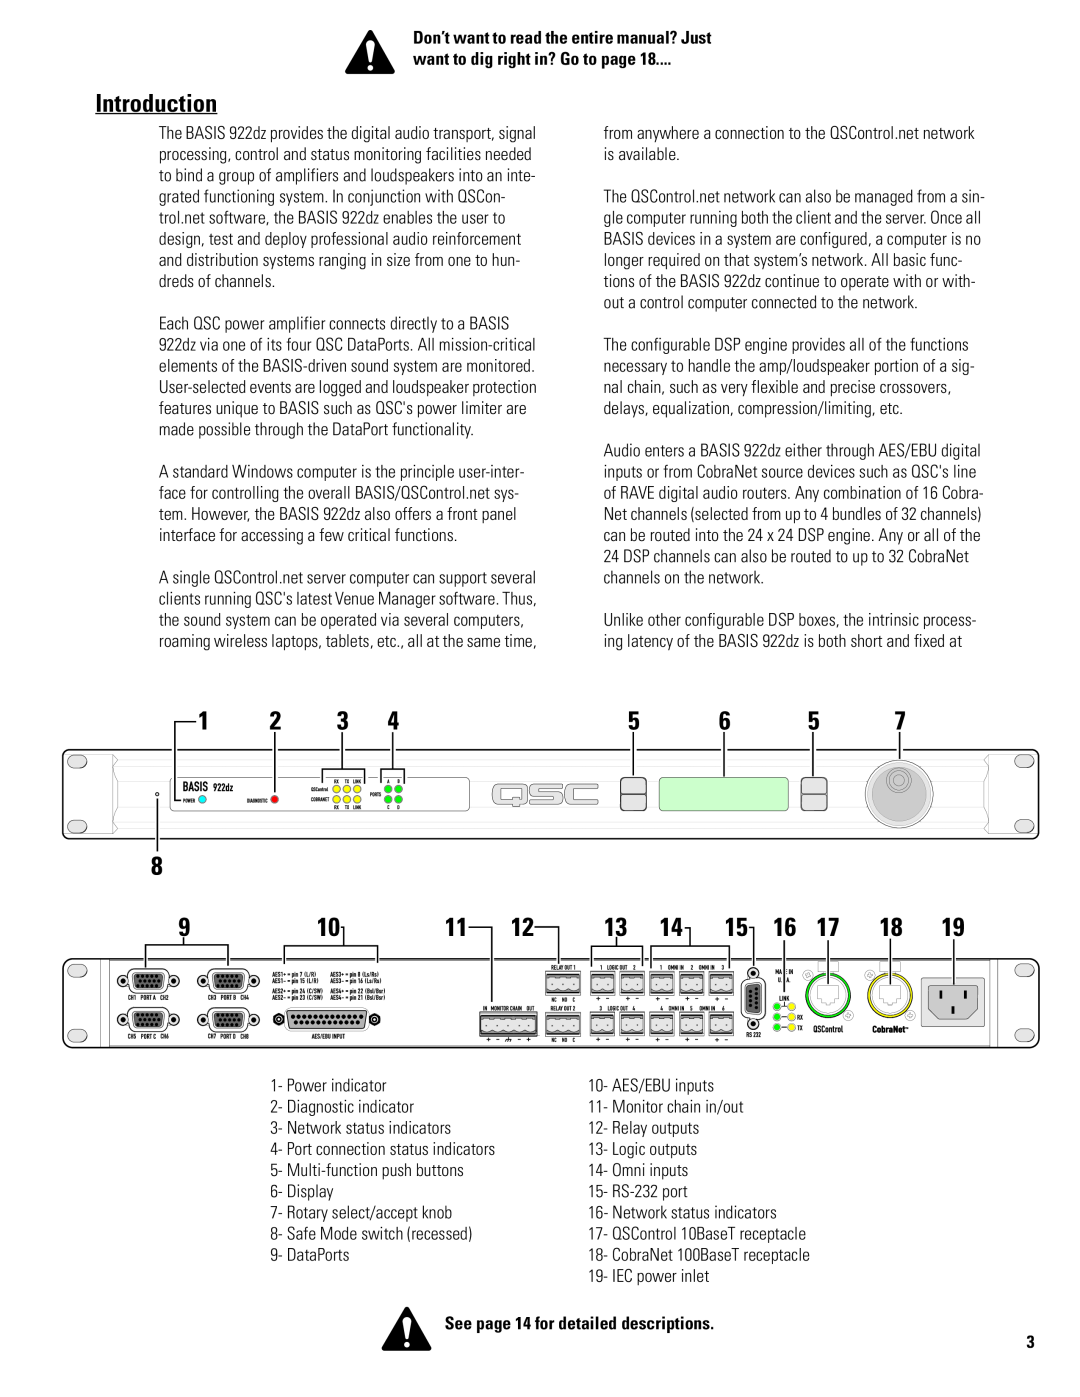 QSC Audio BASIS 922dz Introduction, Don’t want to read the entire manual? Just, want to dig right in? Go to page 